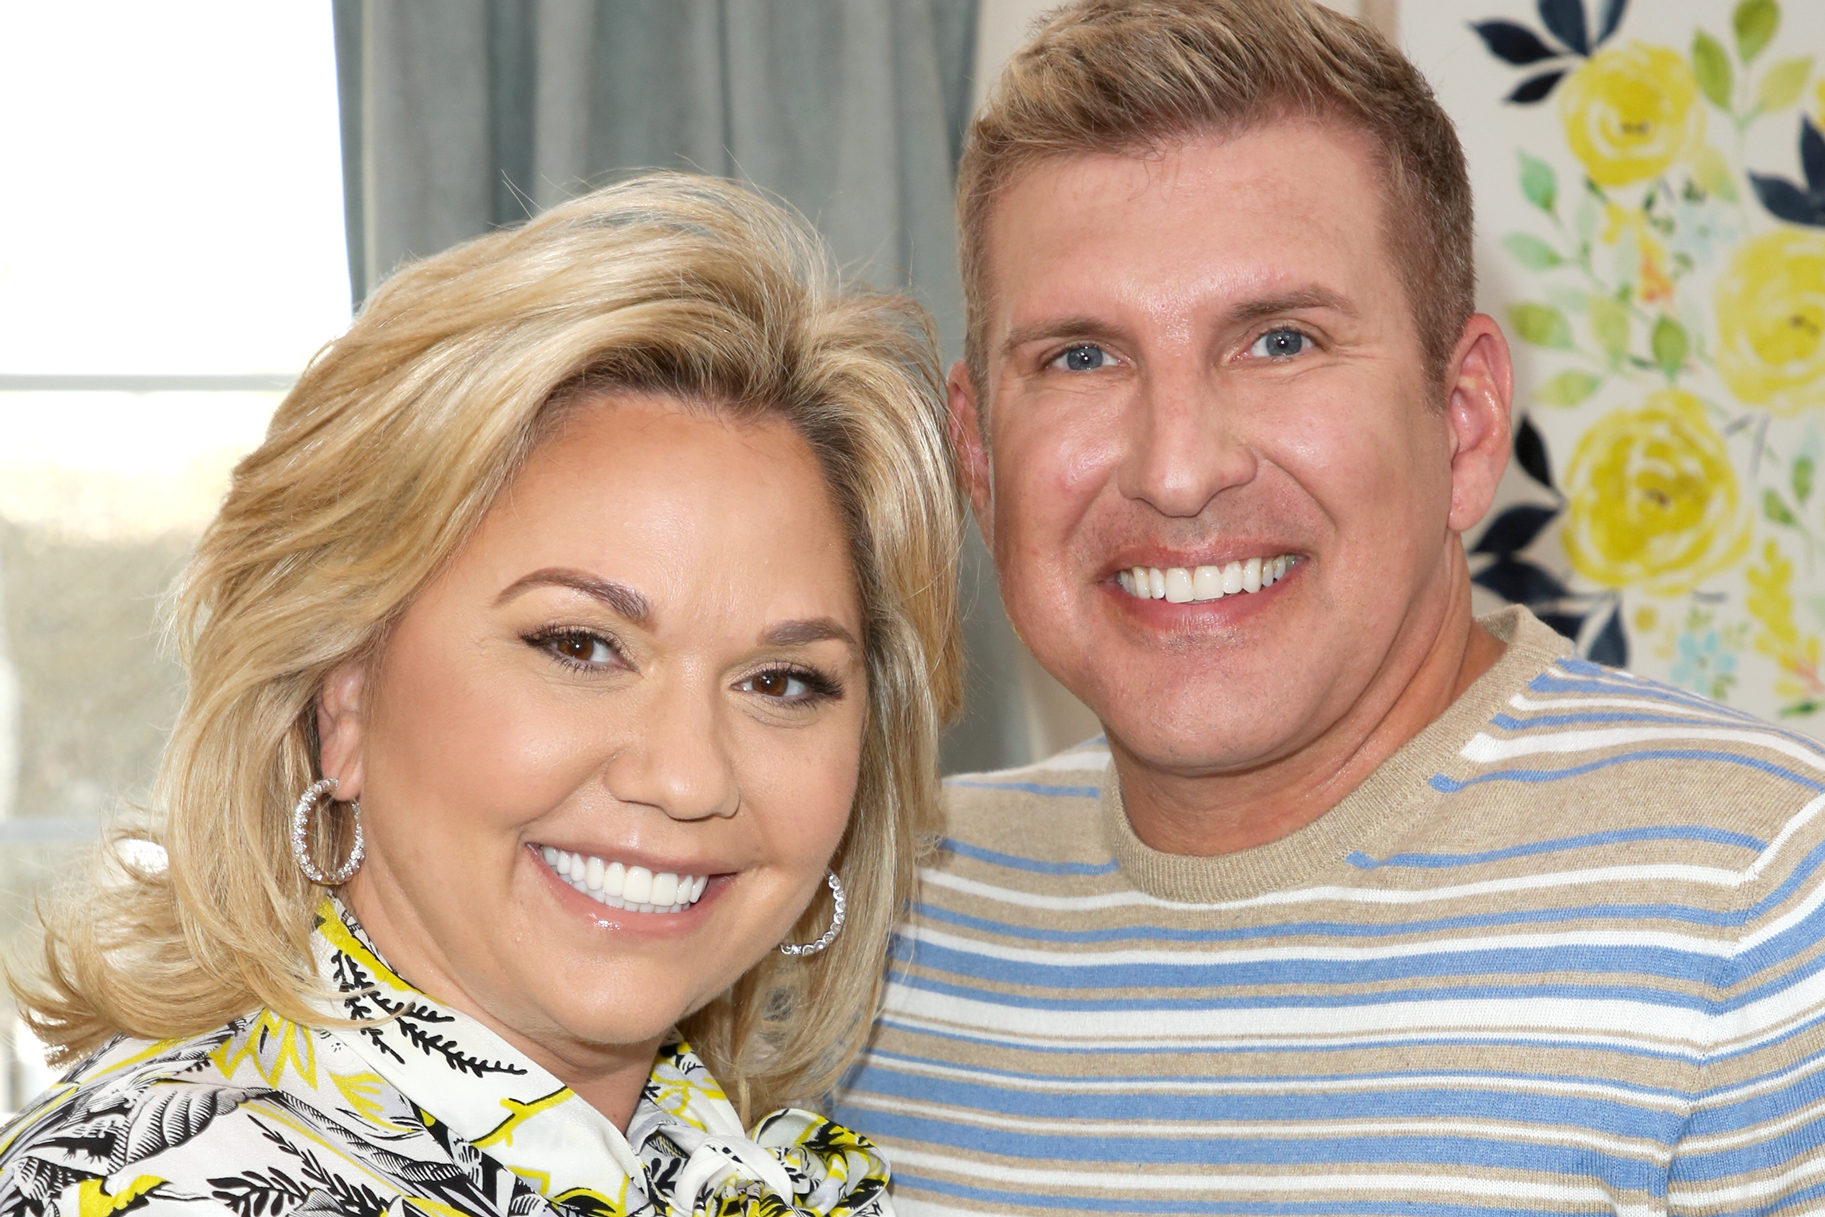 Prayer Is the Best Gift, According to Todd Chrisley, Just Before Sentencing